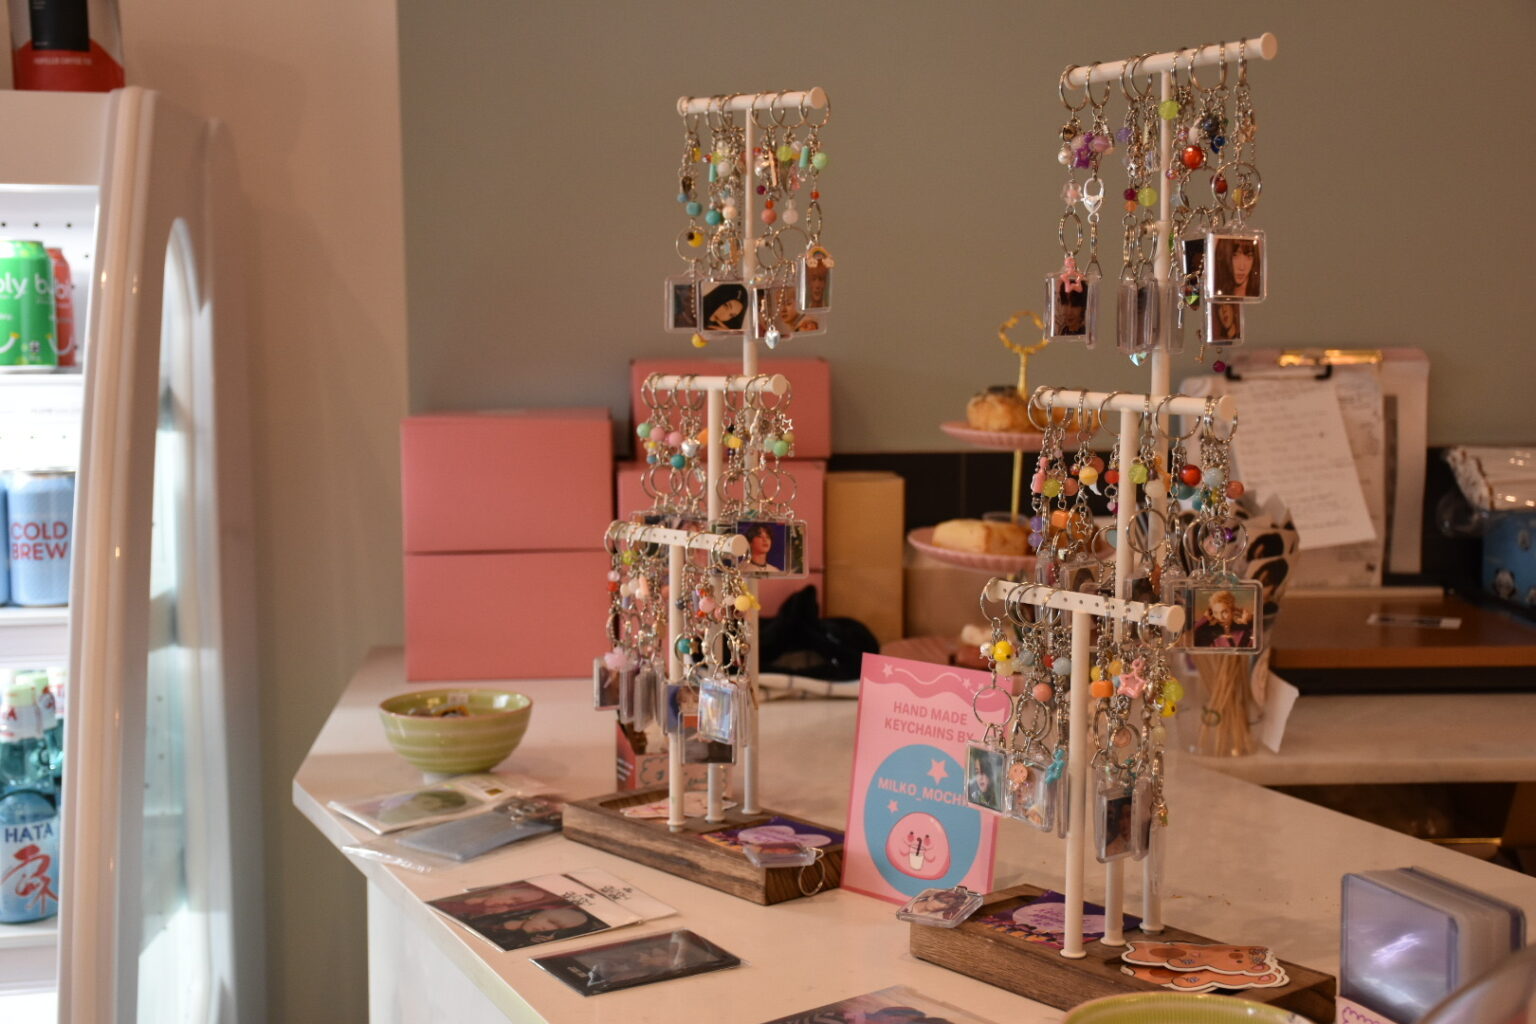 Keychains decorated with beads and photographs of K-pop idols are displayed for sale on the counter of a cafe